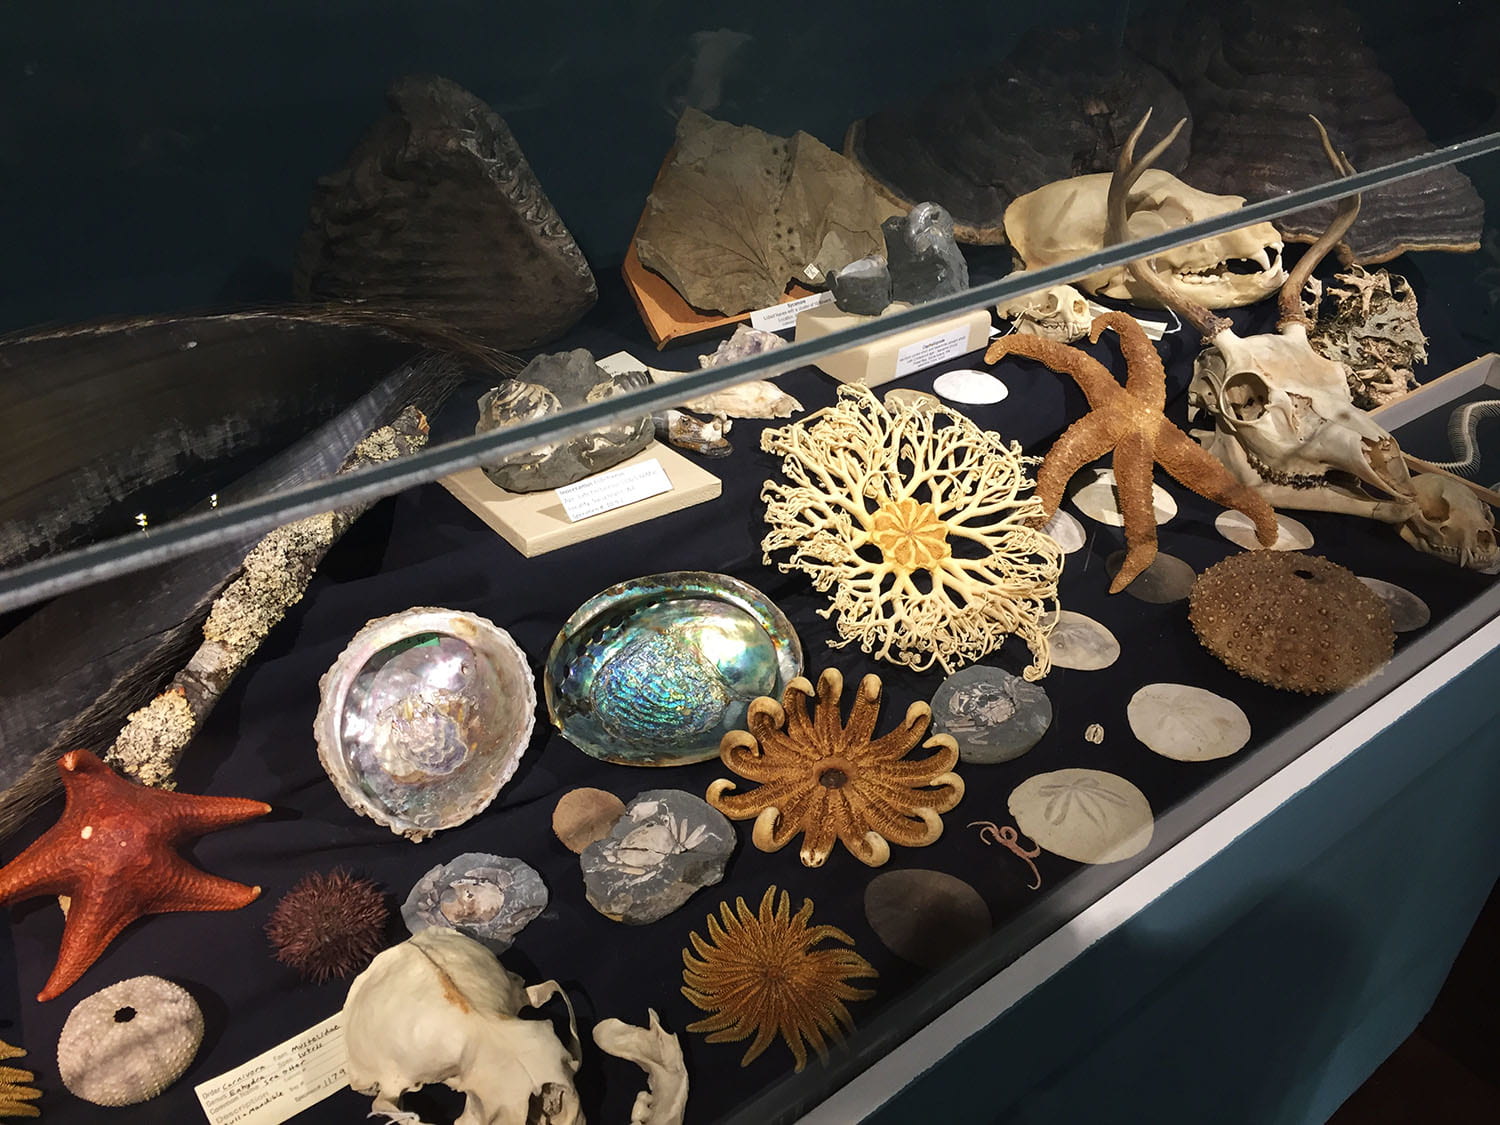 variety of sea life in a display case: starfish, sea urchins, oyster shells, sand dollars, coral, and some animal skulls